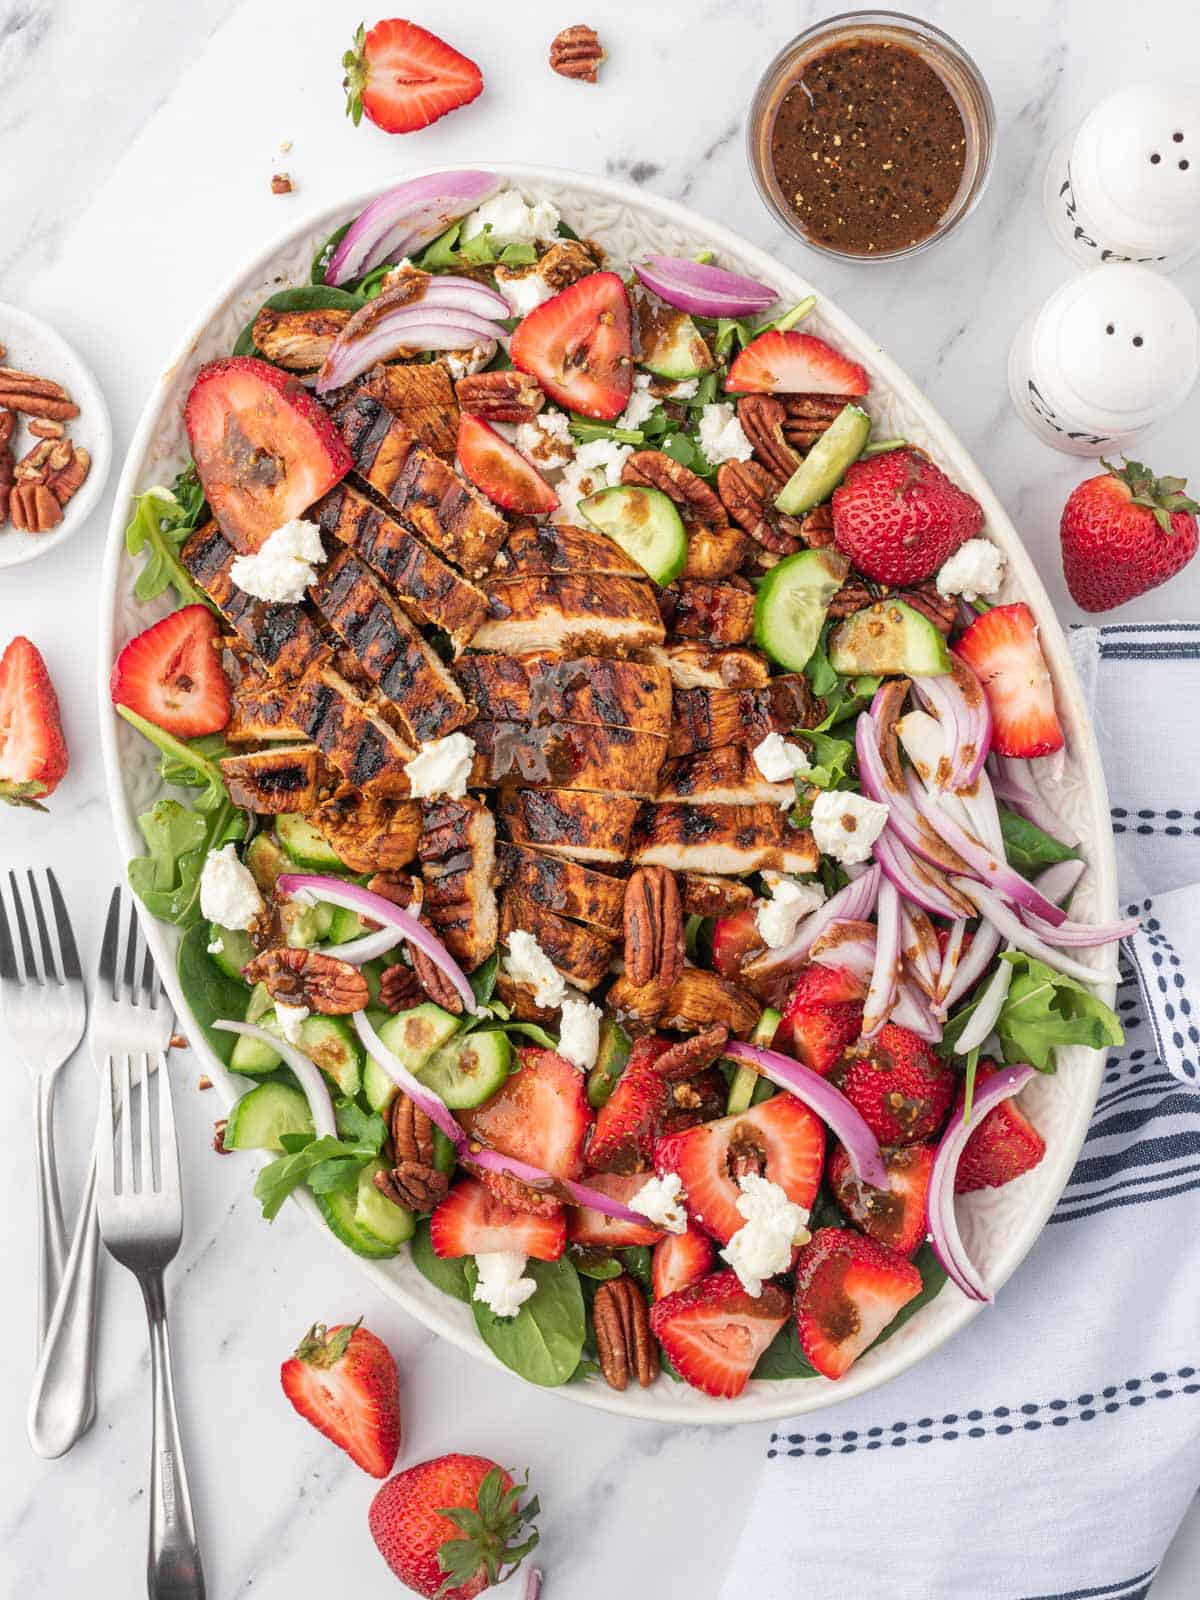 A large platter of spinach salad with strawberries and balsamic grilled chicken with several forks on the side.